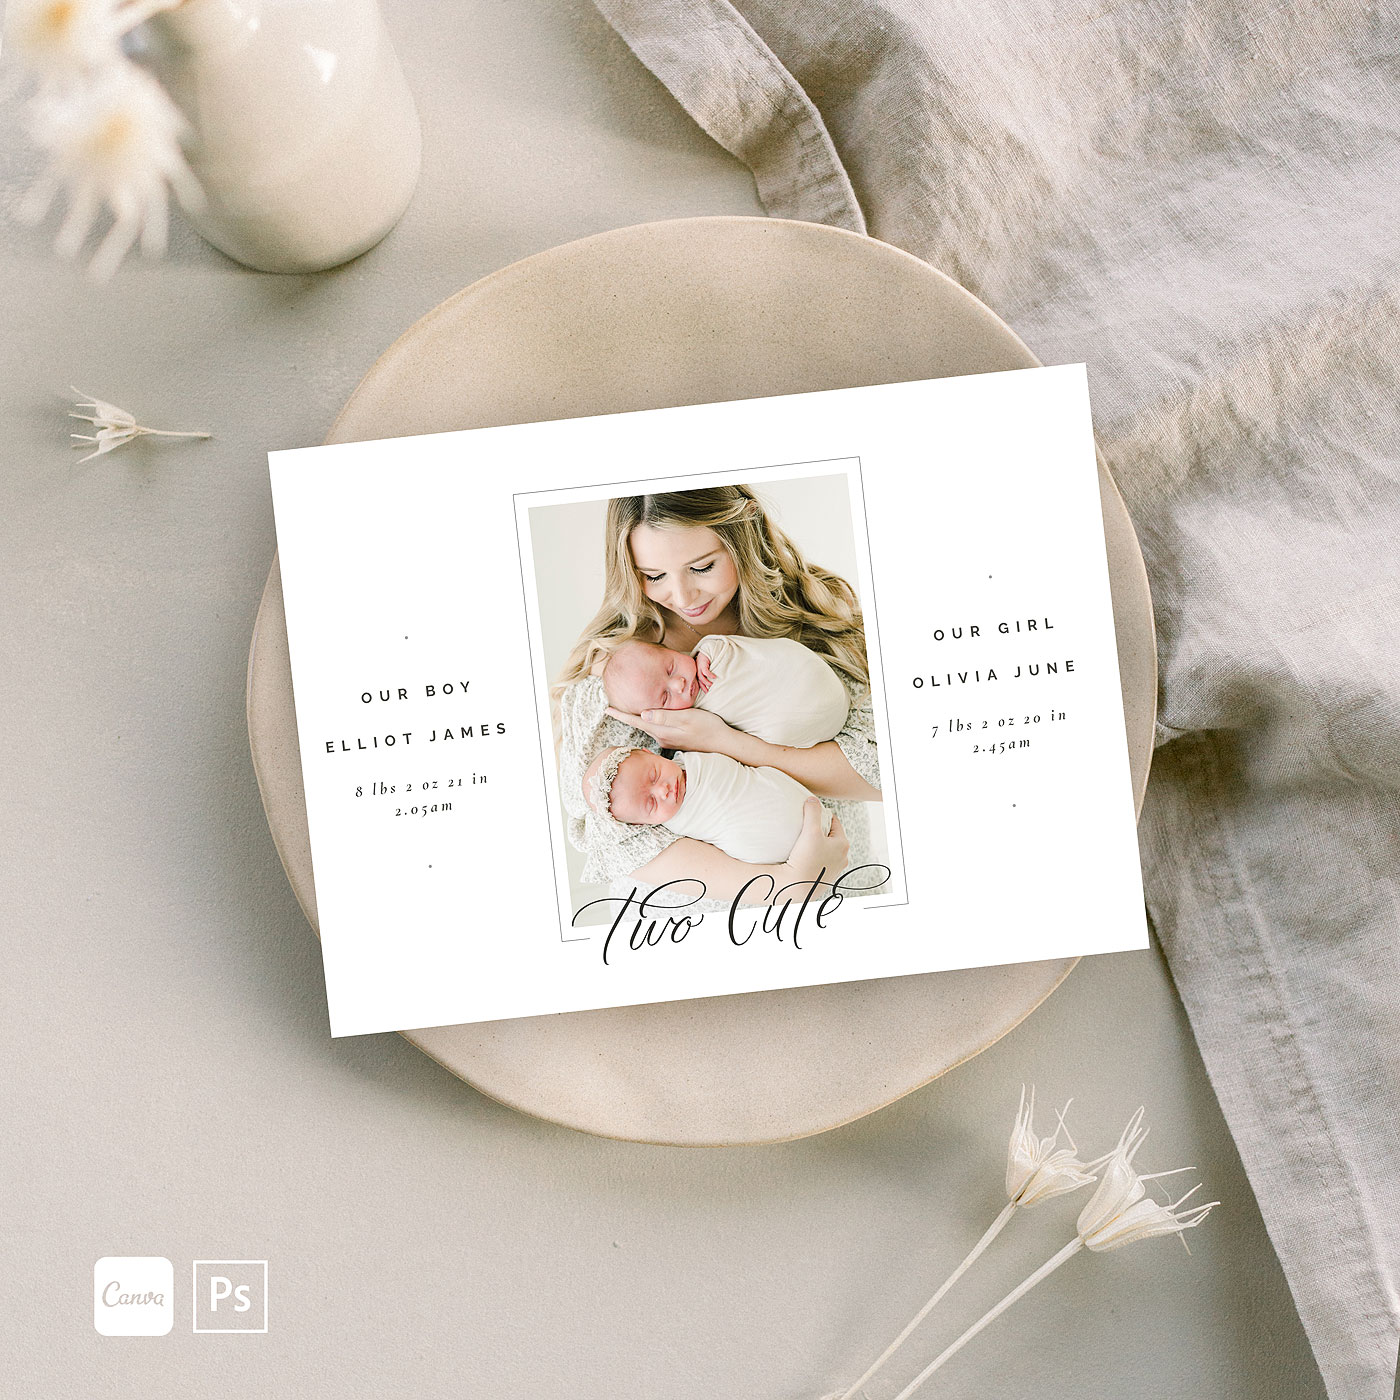 Two Cute 5x7 Birth Announcement Canva + PS - Oh Snap Boutique